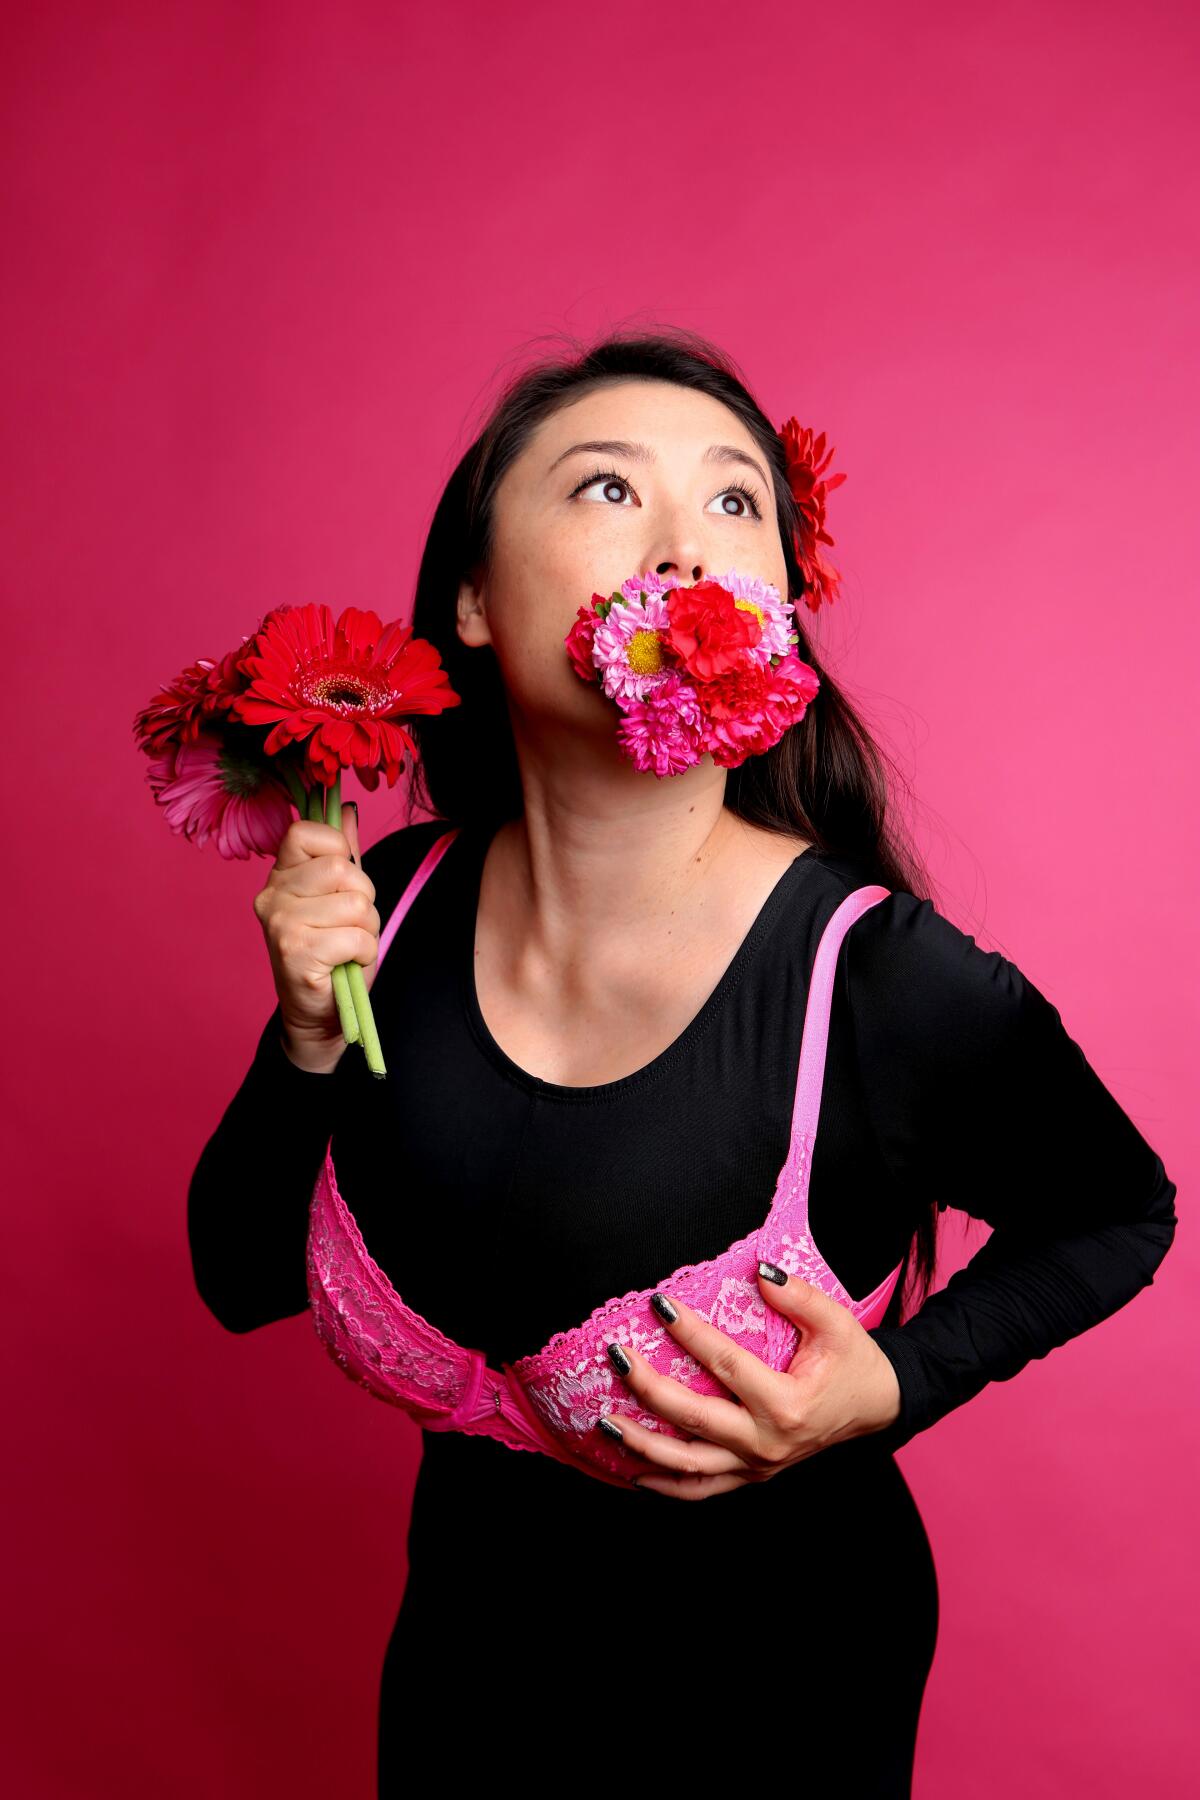 A woman with flowers in her mouth and hand wears a pink bra over an all-black outfit.